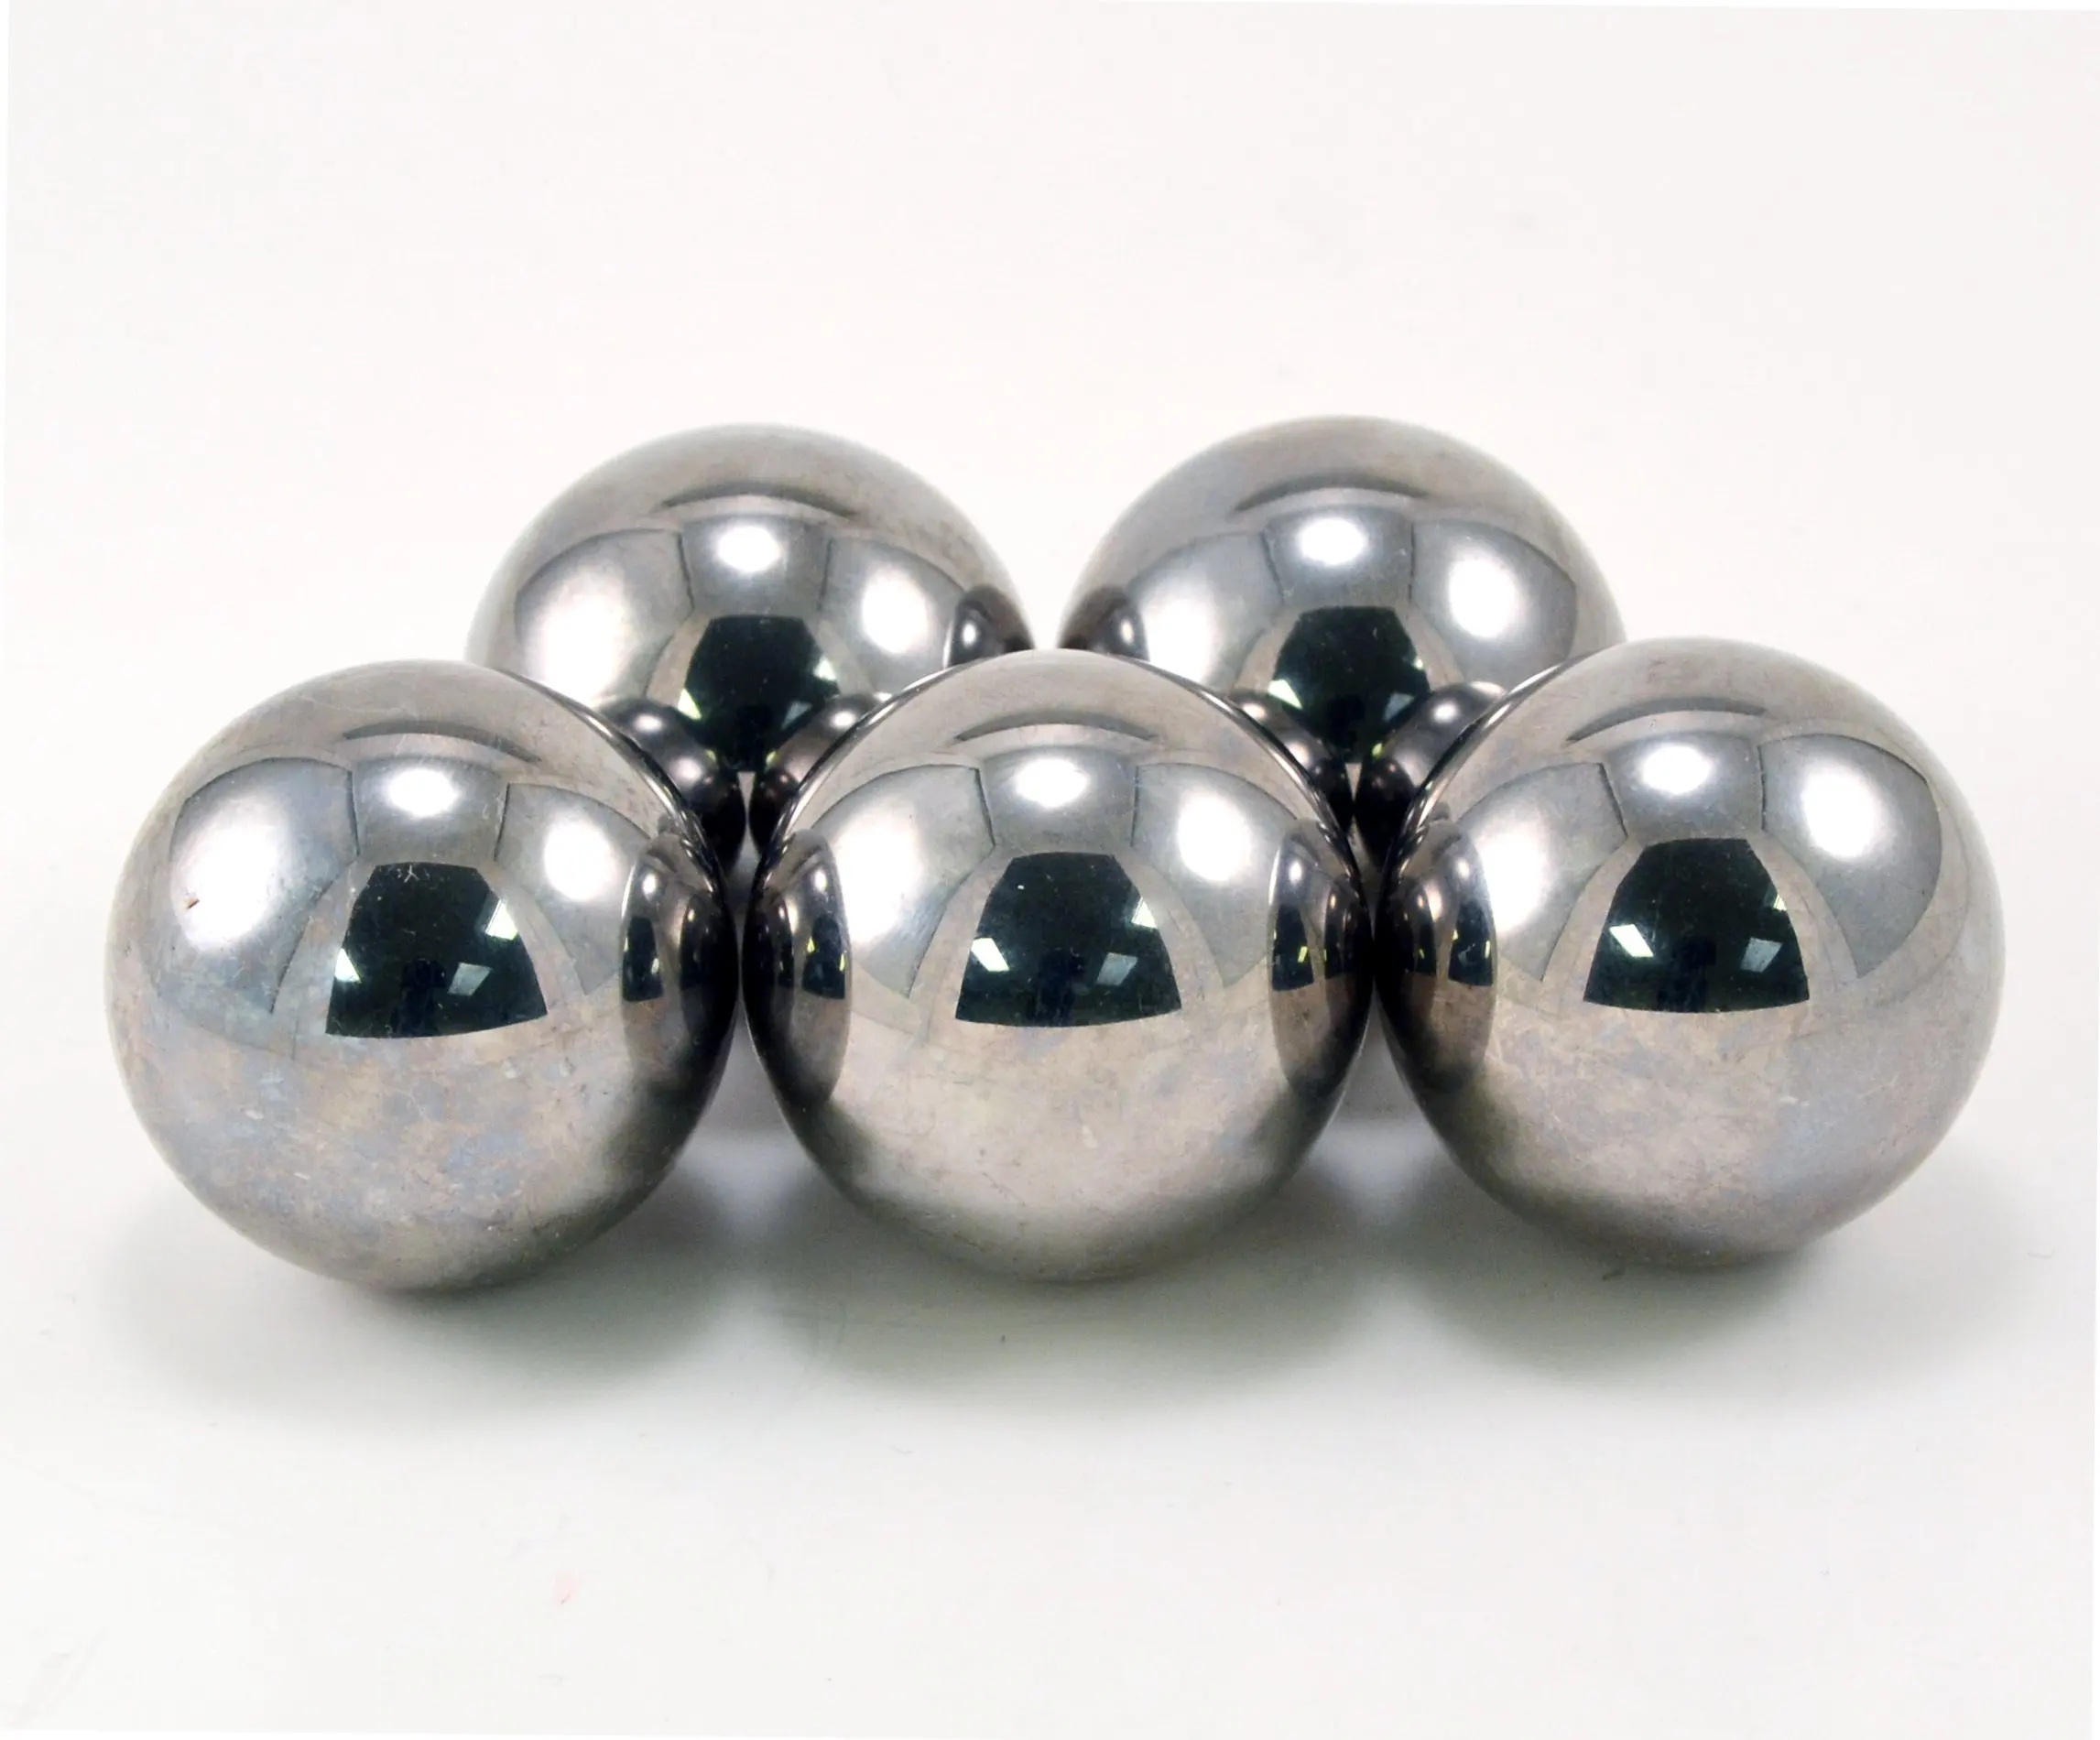 TEN 1-1/2 Inch Steel Balls for Monkey Fist Cores CAN BE DRILLED 